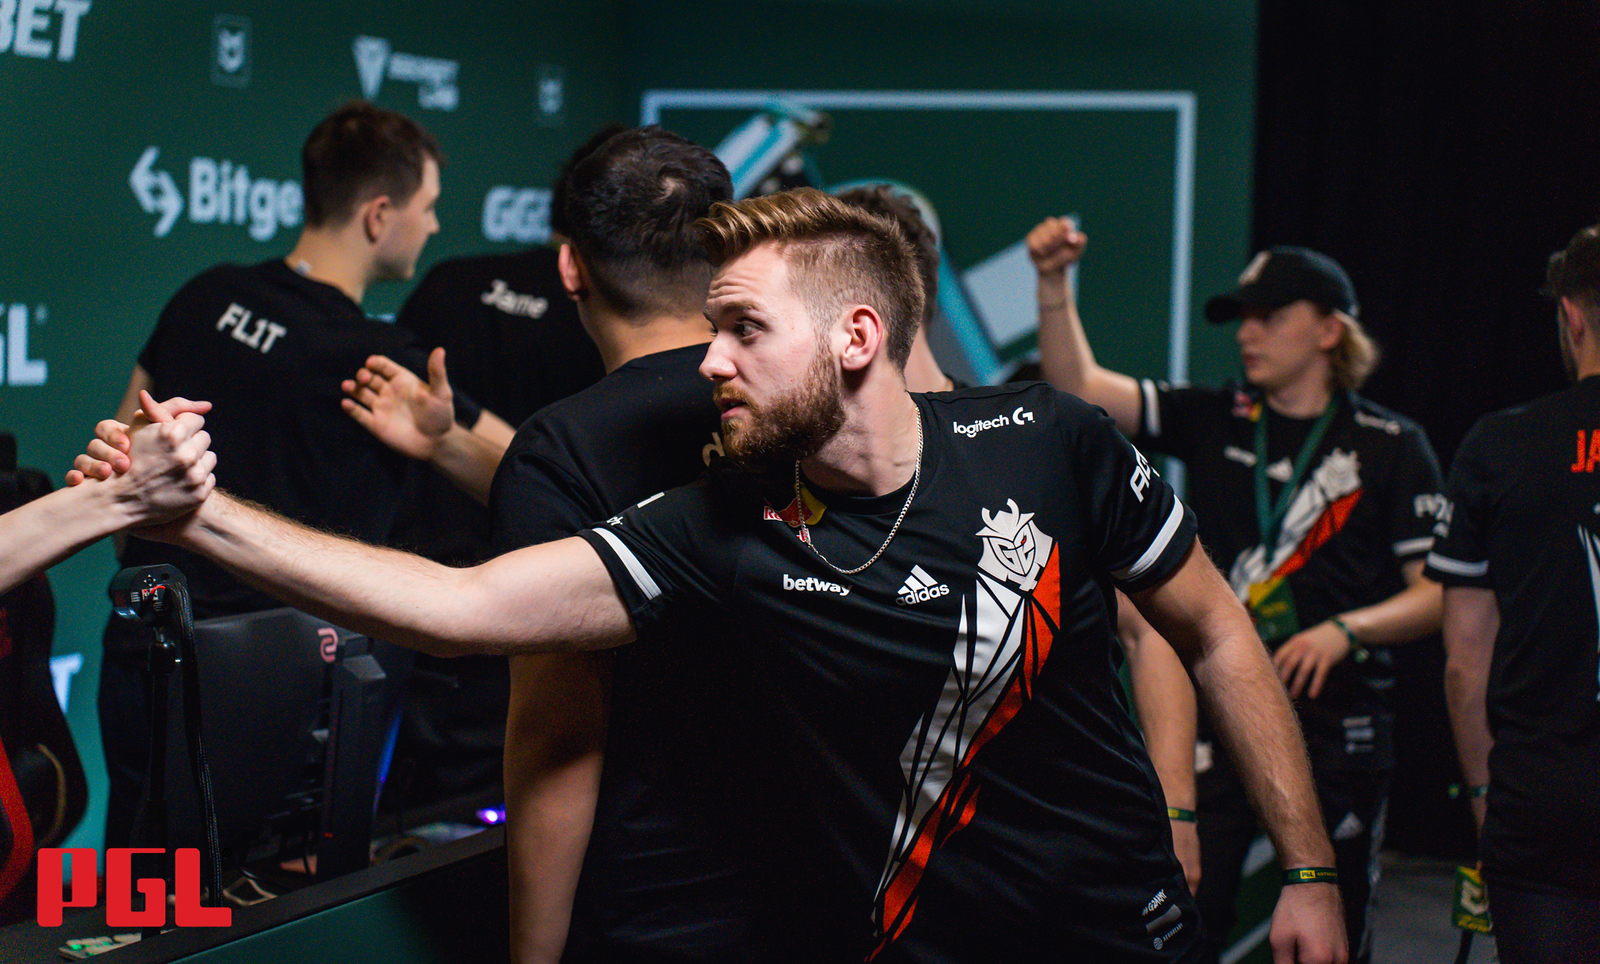 G2 players shake hands with their opponents at the end of a game of CS:GO at the Antwerp Major 